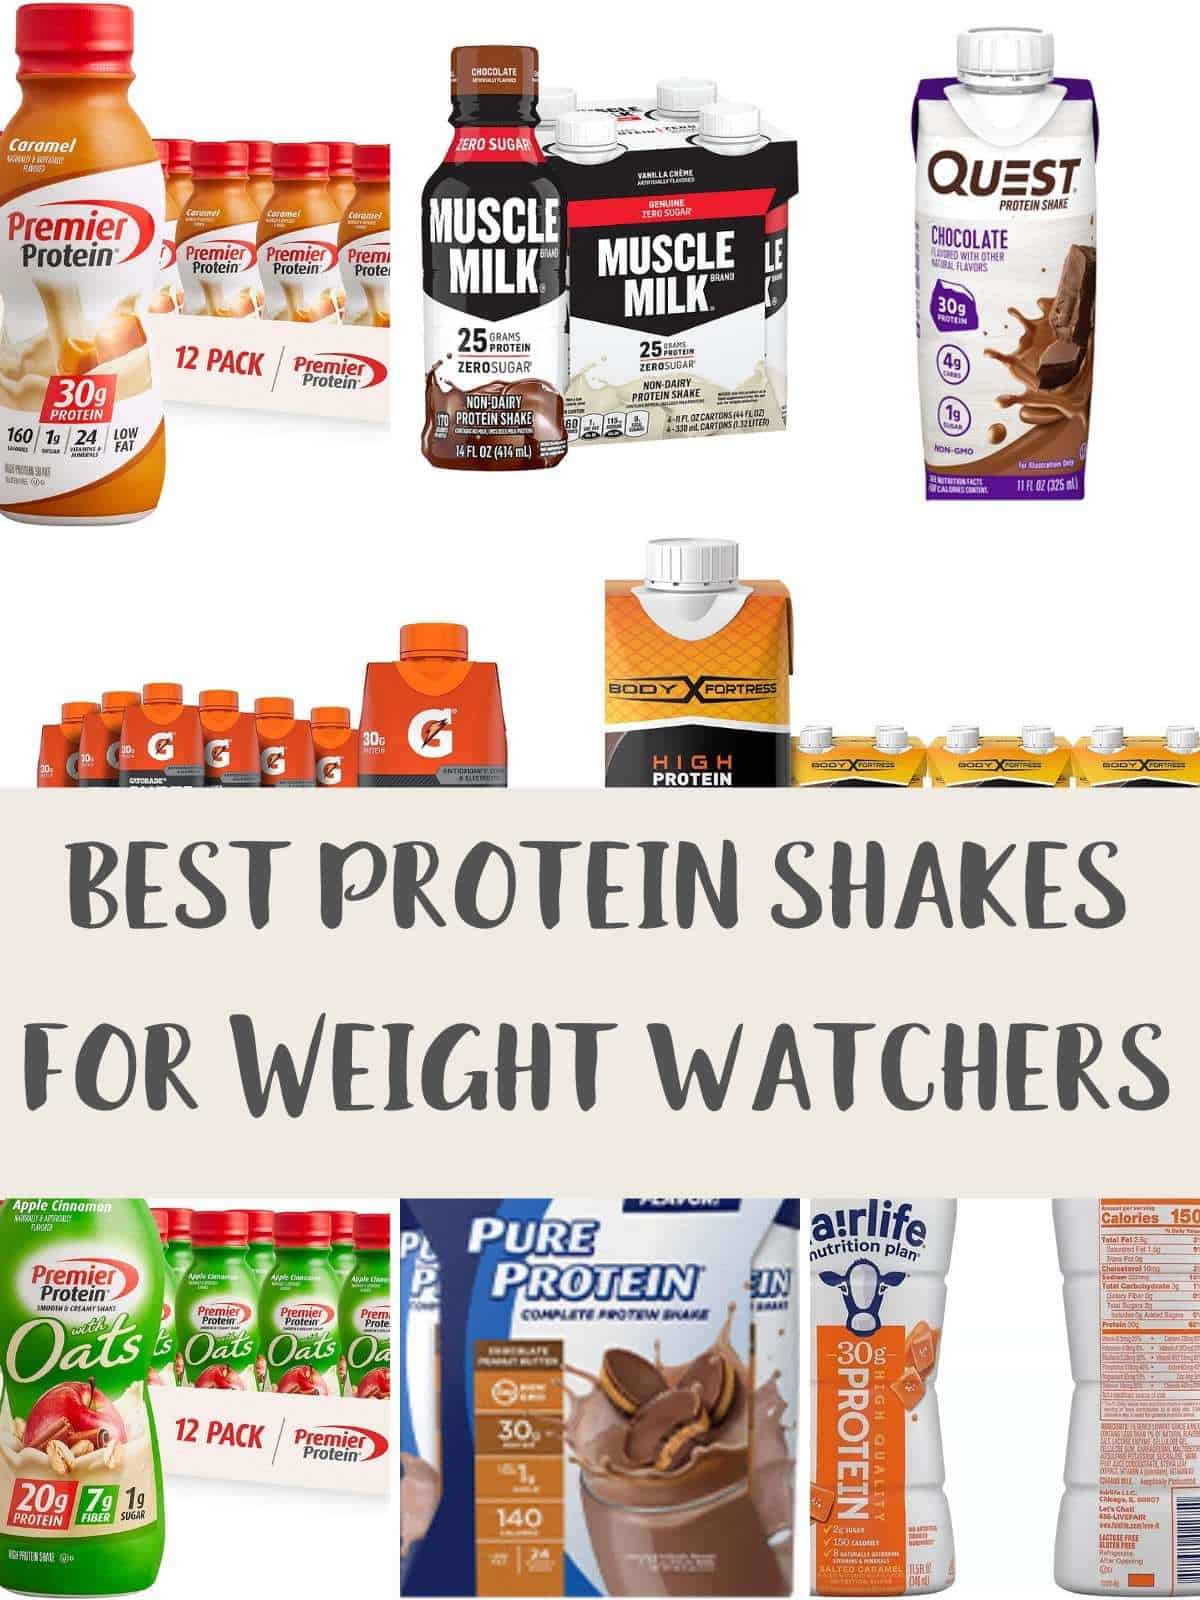 A selection of protein shakes with text overlay stating Best Protein Shakes for Weight Watchers.